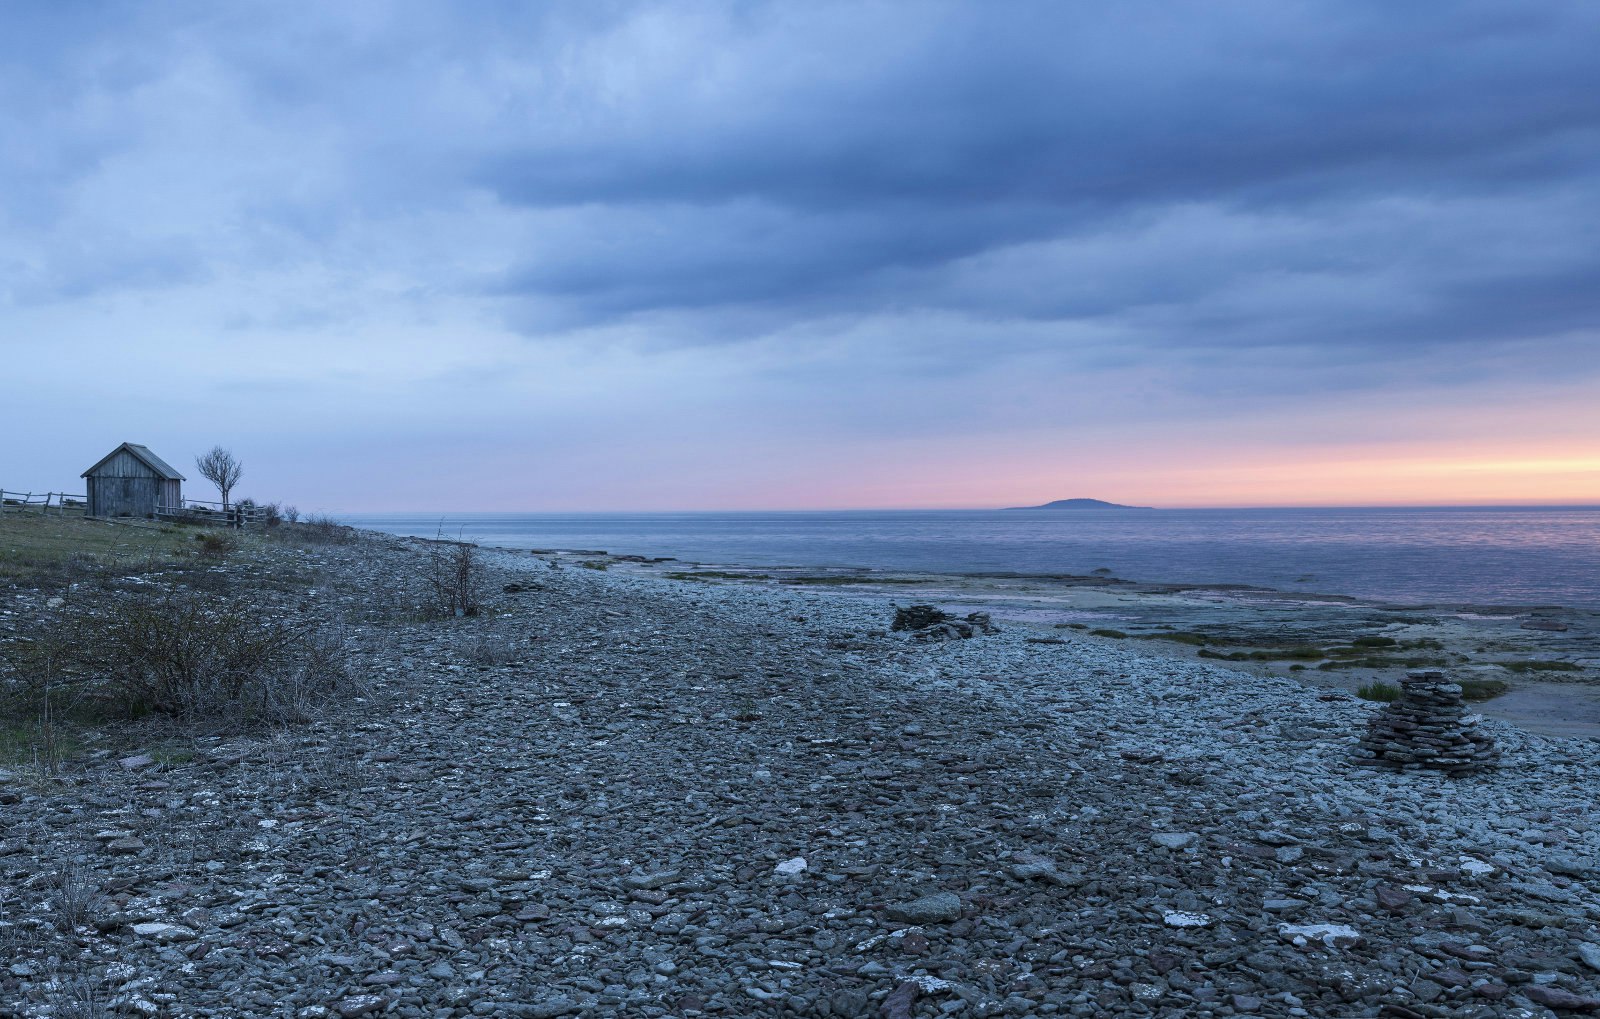 A stony beach after sunset with a sliver of pink in the sky. On the left background is an old timber hut with one bare tree next to it.